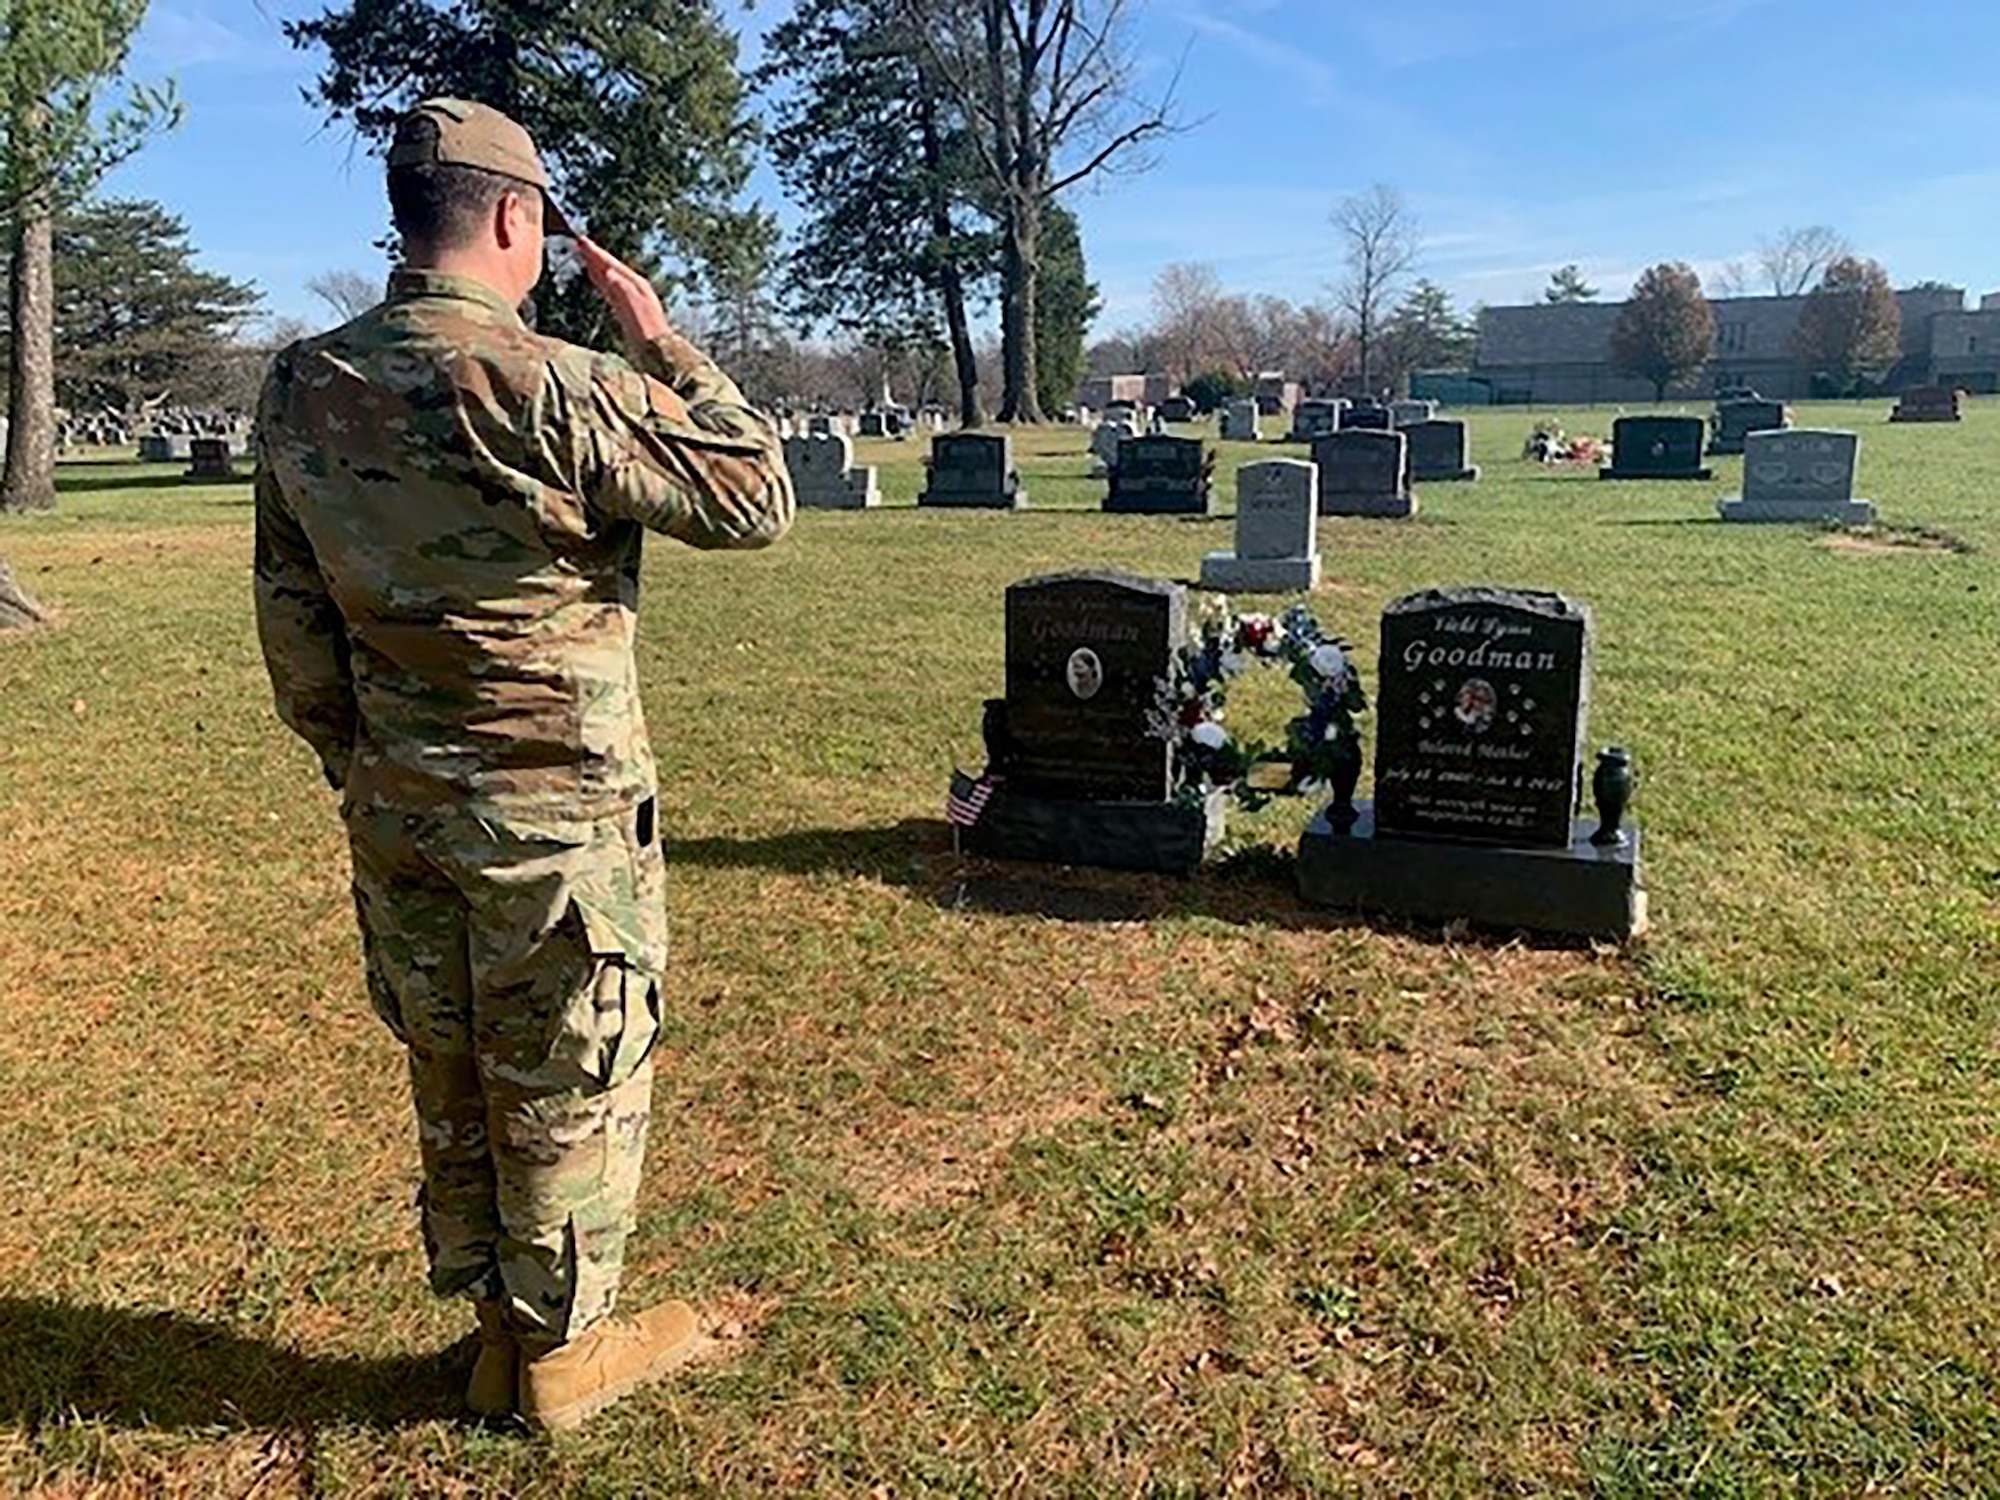 Master Sgt. Mark Reel, 445th Logistics Readiness Squadron logistics supply manager, salutes the grave of Senior Airman Ashton L. M. Goodman, who passed away May 26, 2009 while serving in Afghanistan. Reel and Senior Master Sgt. Douglas Schaumleffel, 445th LRS ground transportation NCO in charge, ere runners for the 2T1 Warrior Wreath Project. They brought their wreath to Goodman’s grave, located at Washington Park East Cemetery, Indianapolis, Indiana.